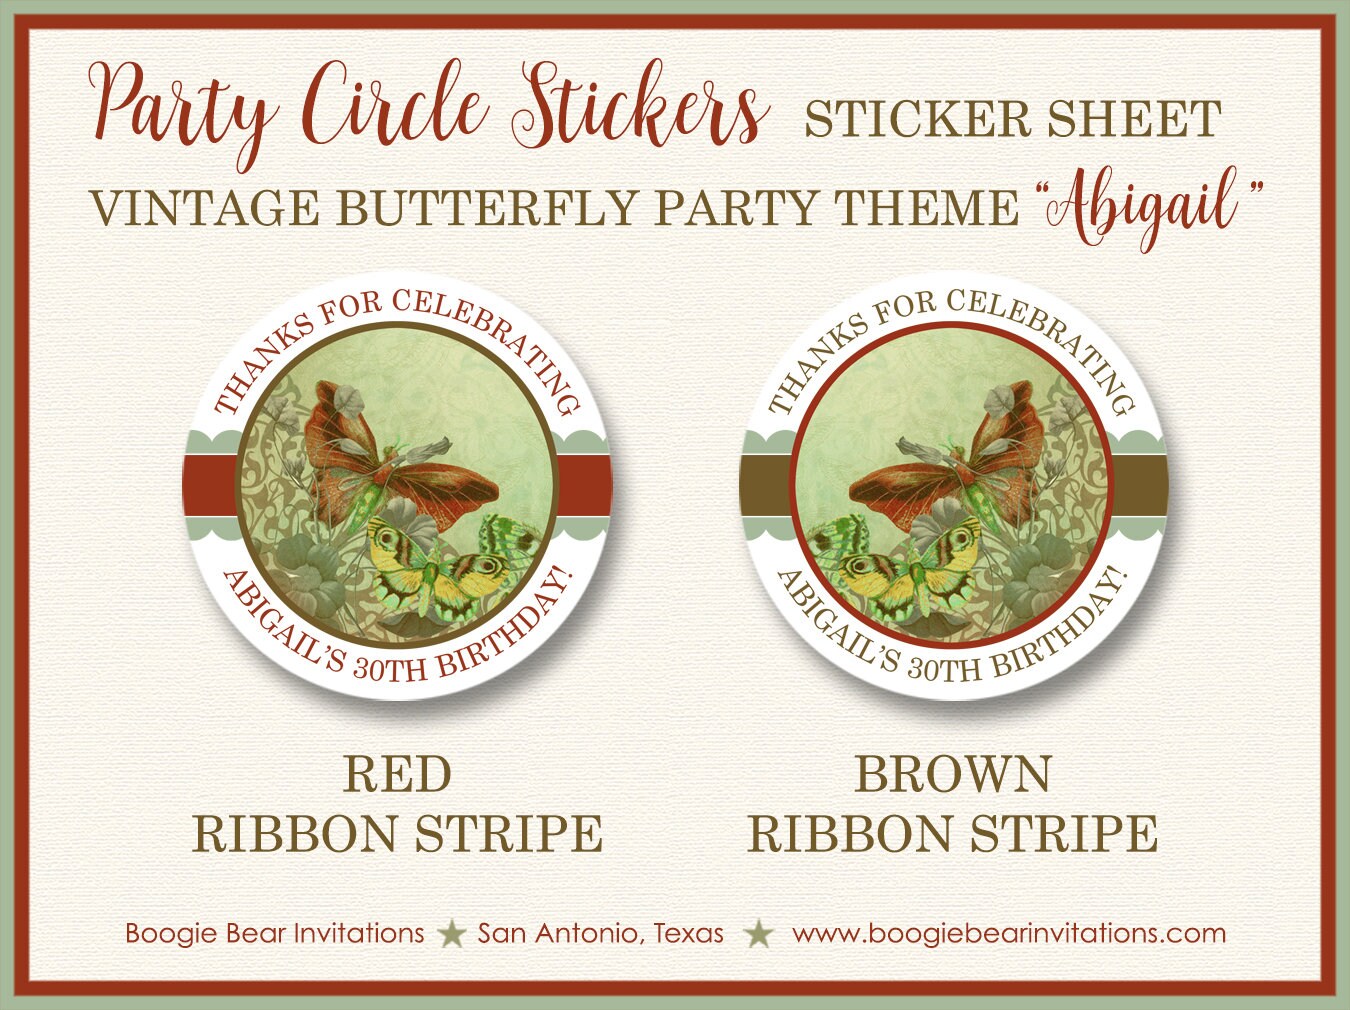 Vintage Butterfly Party Stickers Circle Tag Birthday Flower Garden Green Antique Outdoor Picnic Spring Boogie Bear Invitations Abigail Theme